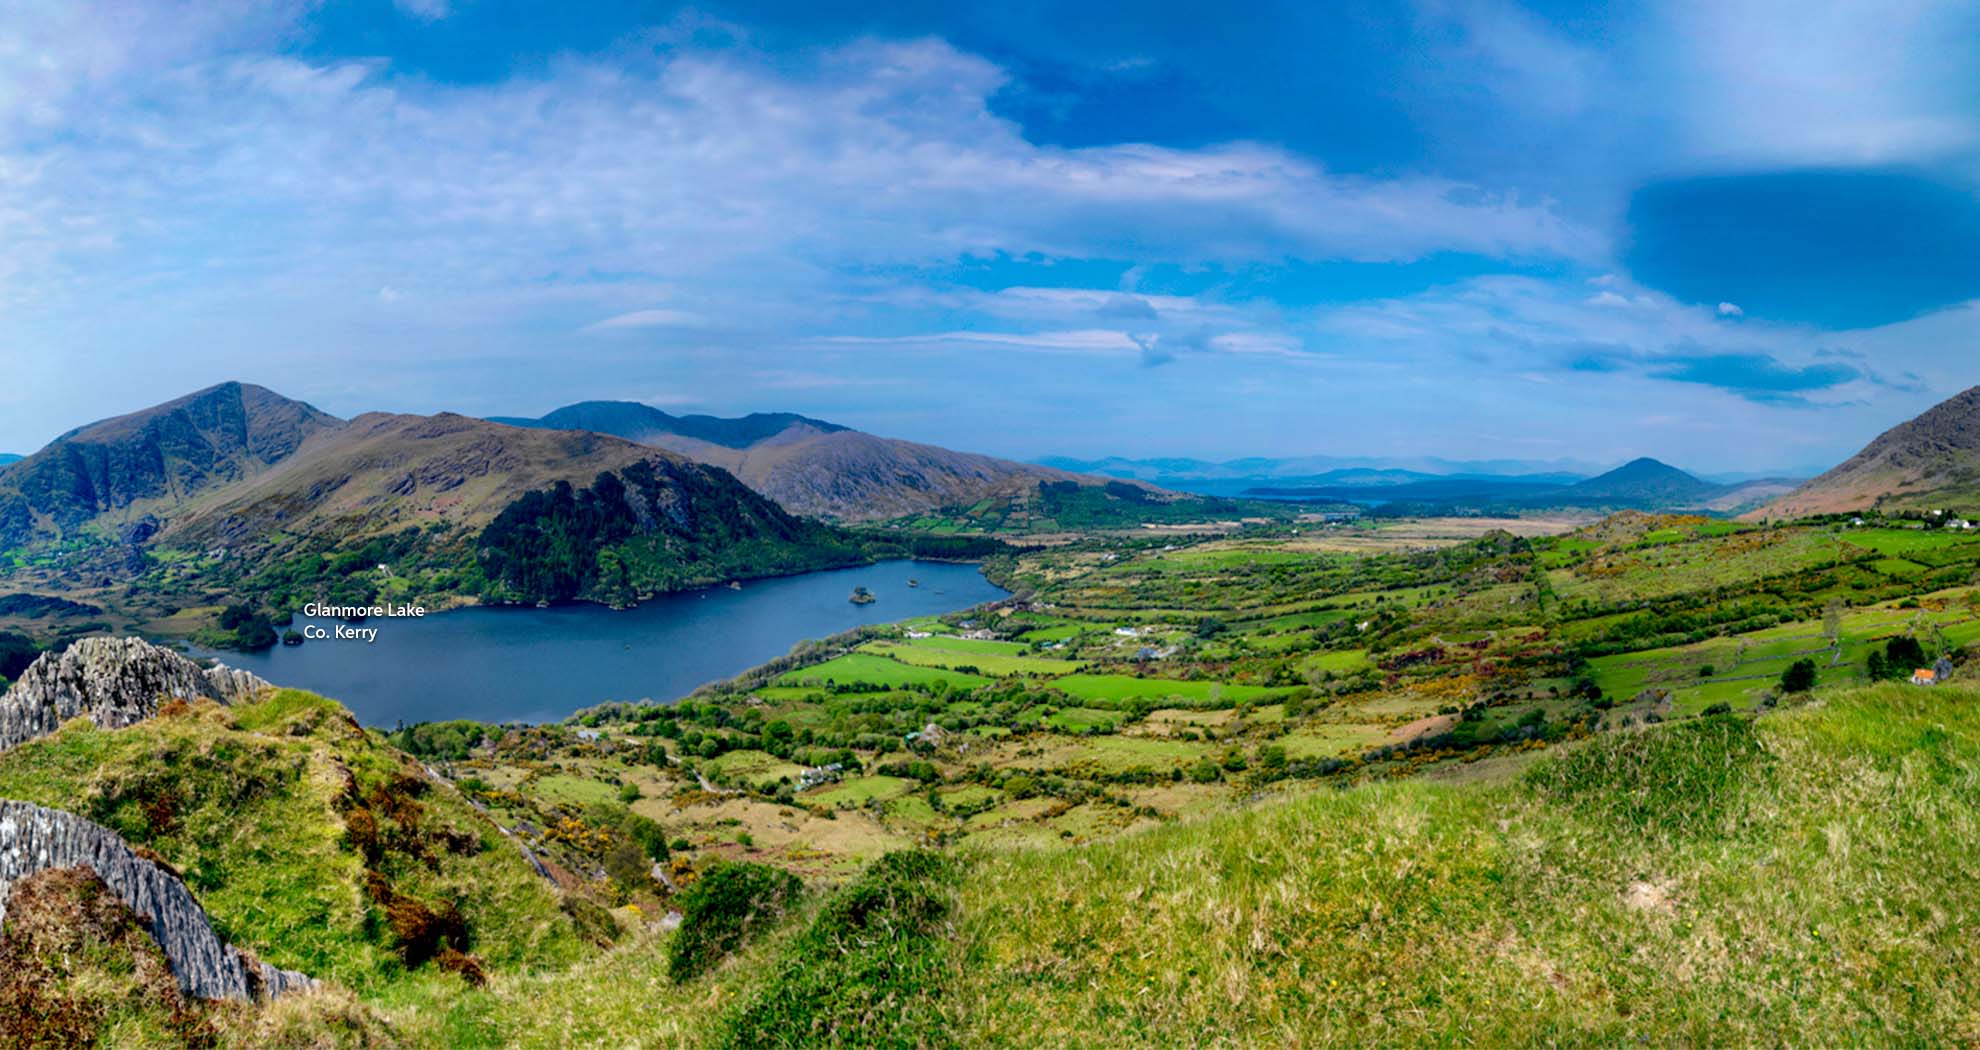 A wide aerial view of Errigal Mountain, Donegal